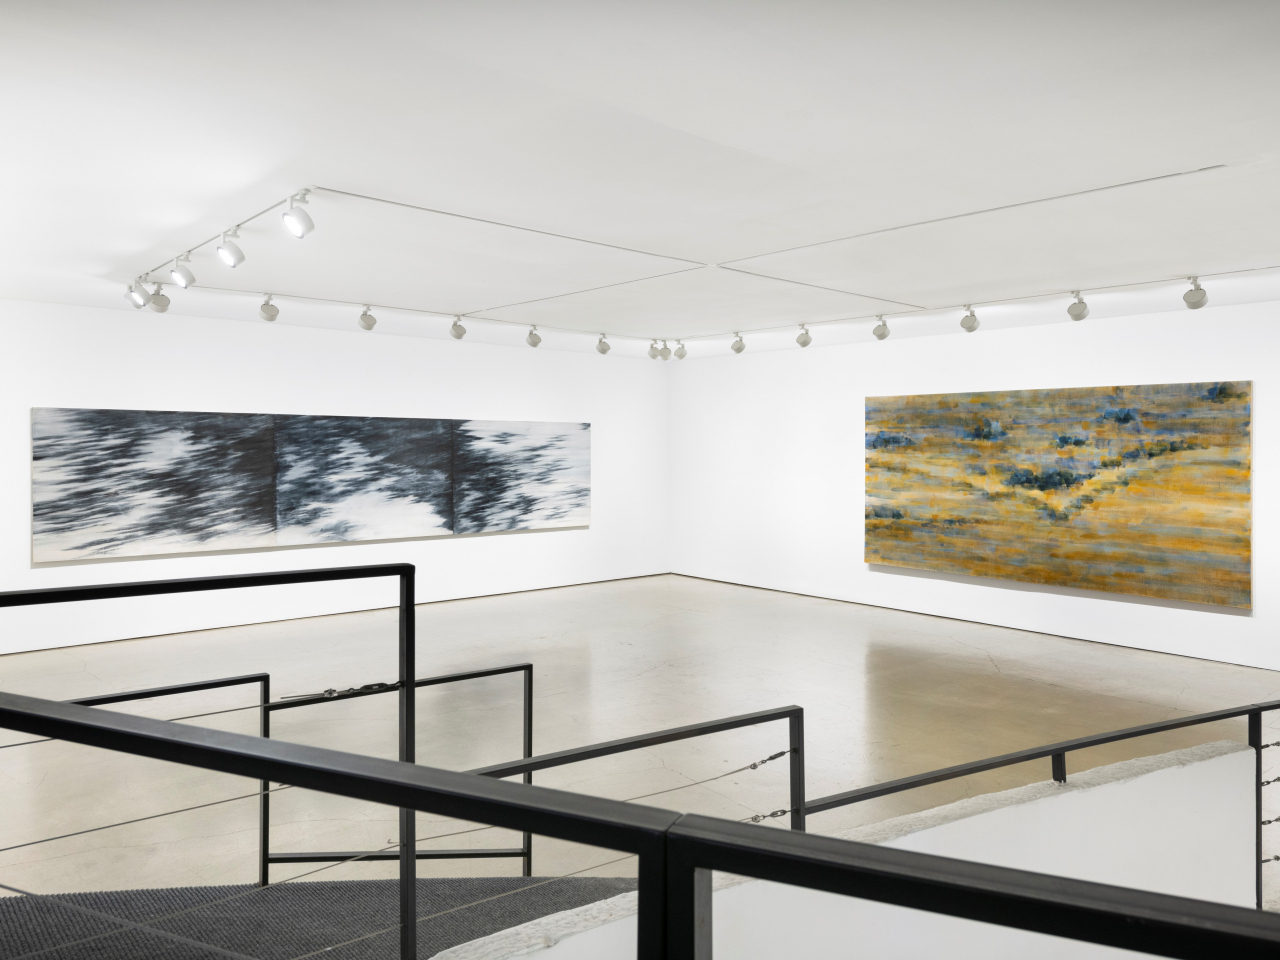 An installation view shows 